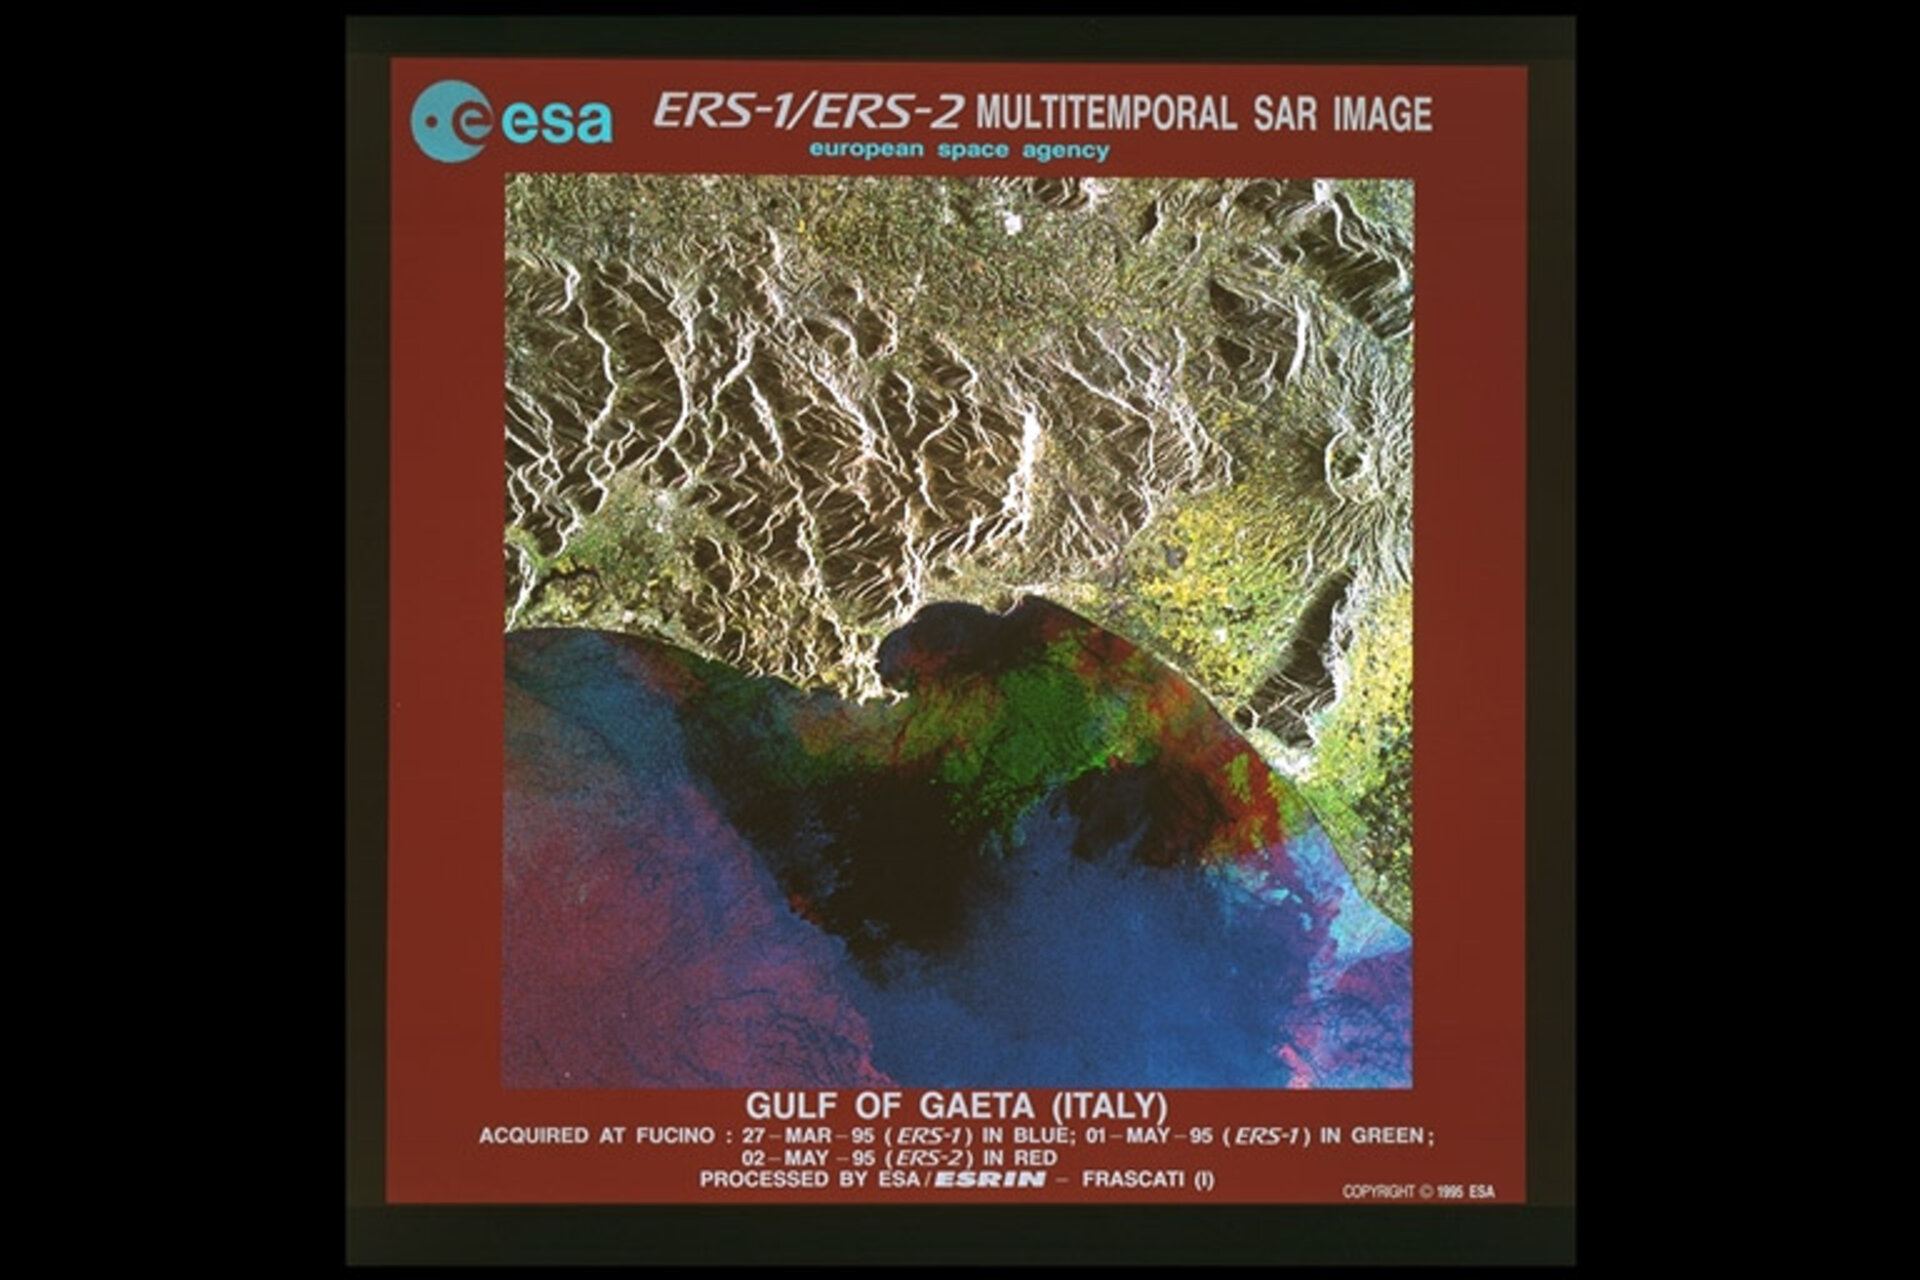 ERS-1/ERS-2 multitemporal radar image of Italy